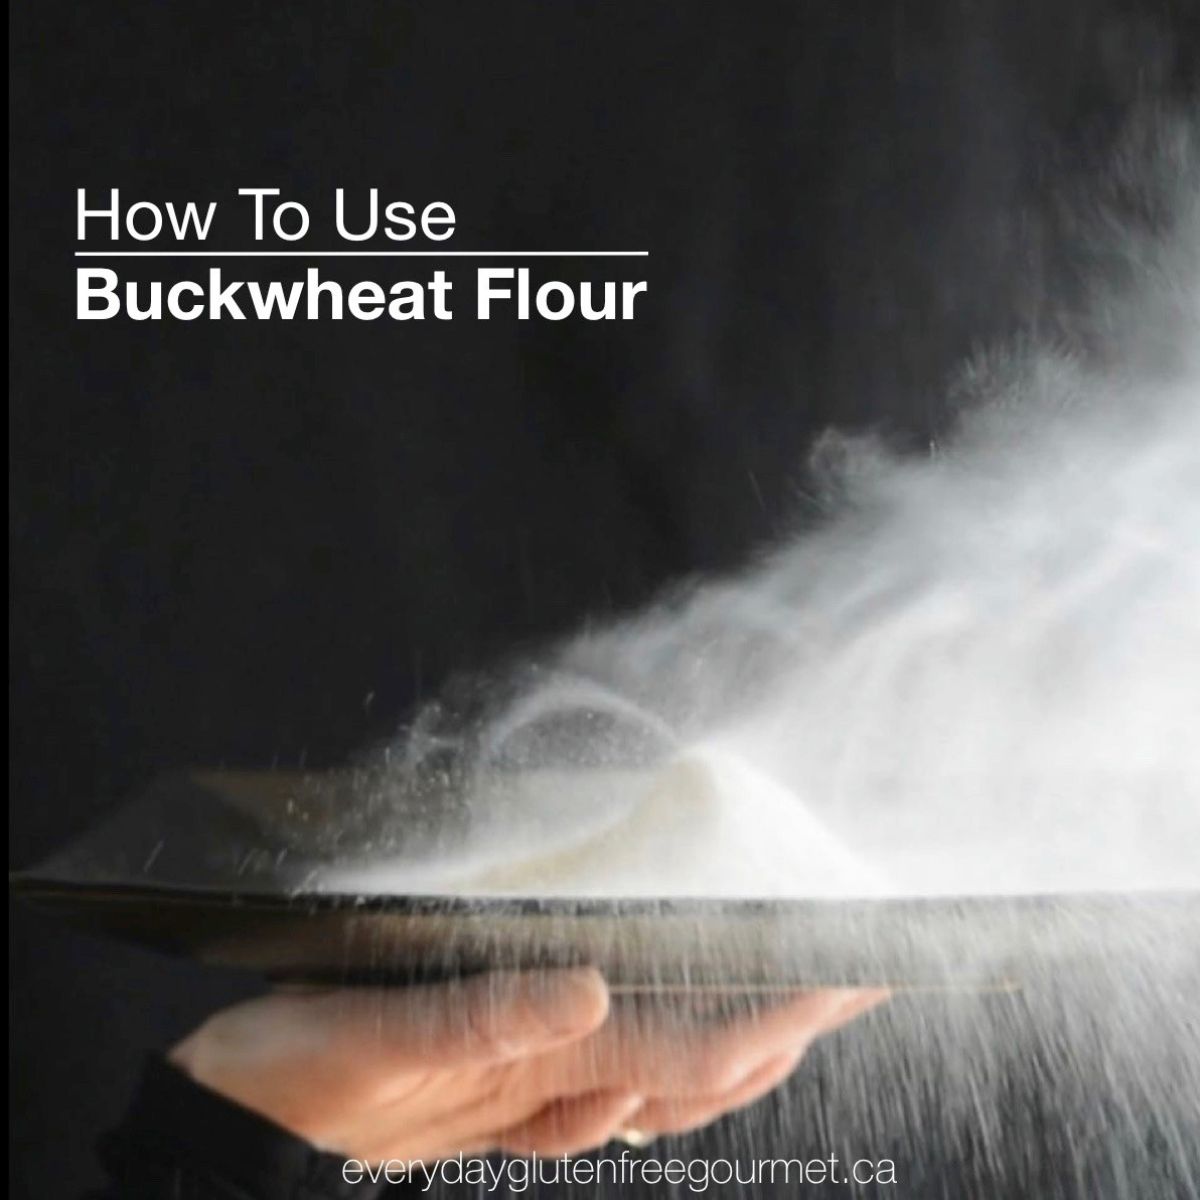 A black background showing two hands holding a black plate with a pile of buckwheat flour and a cloud of it being blown off the plate.